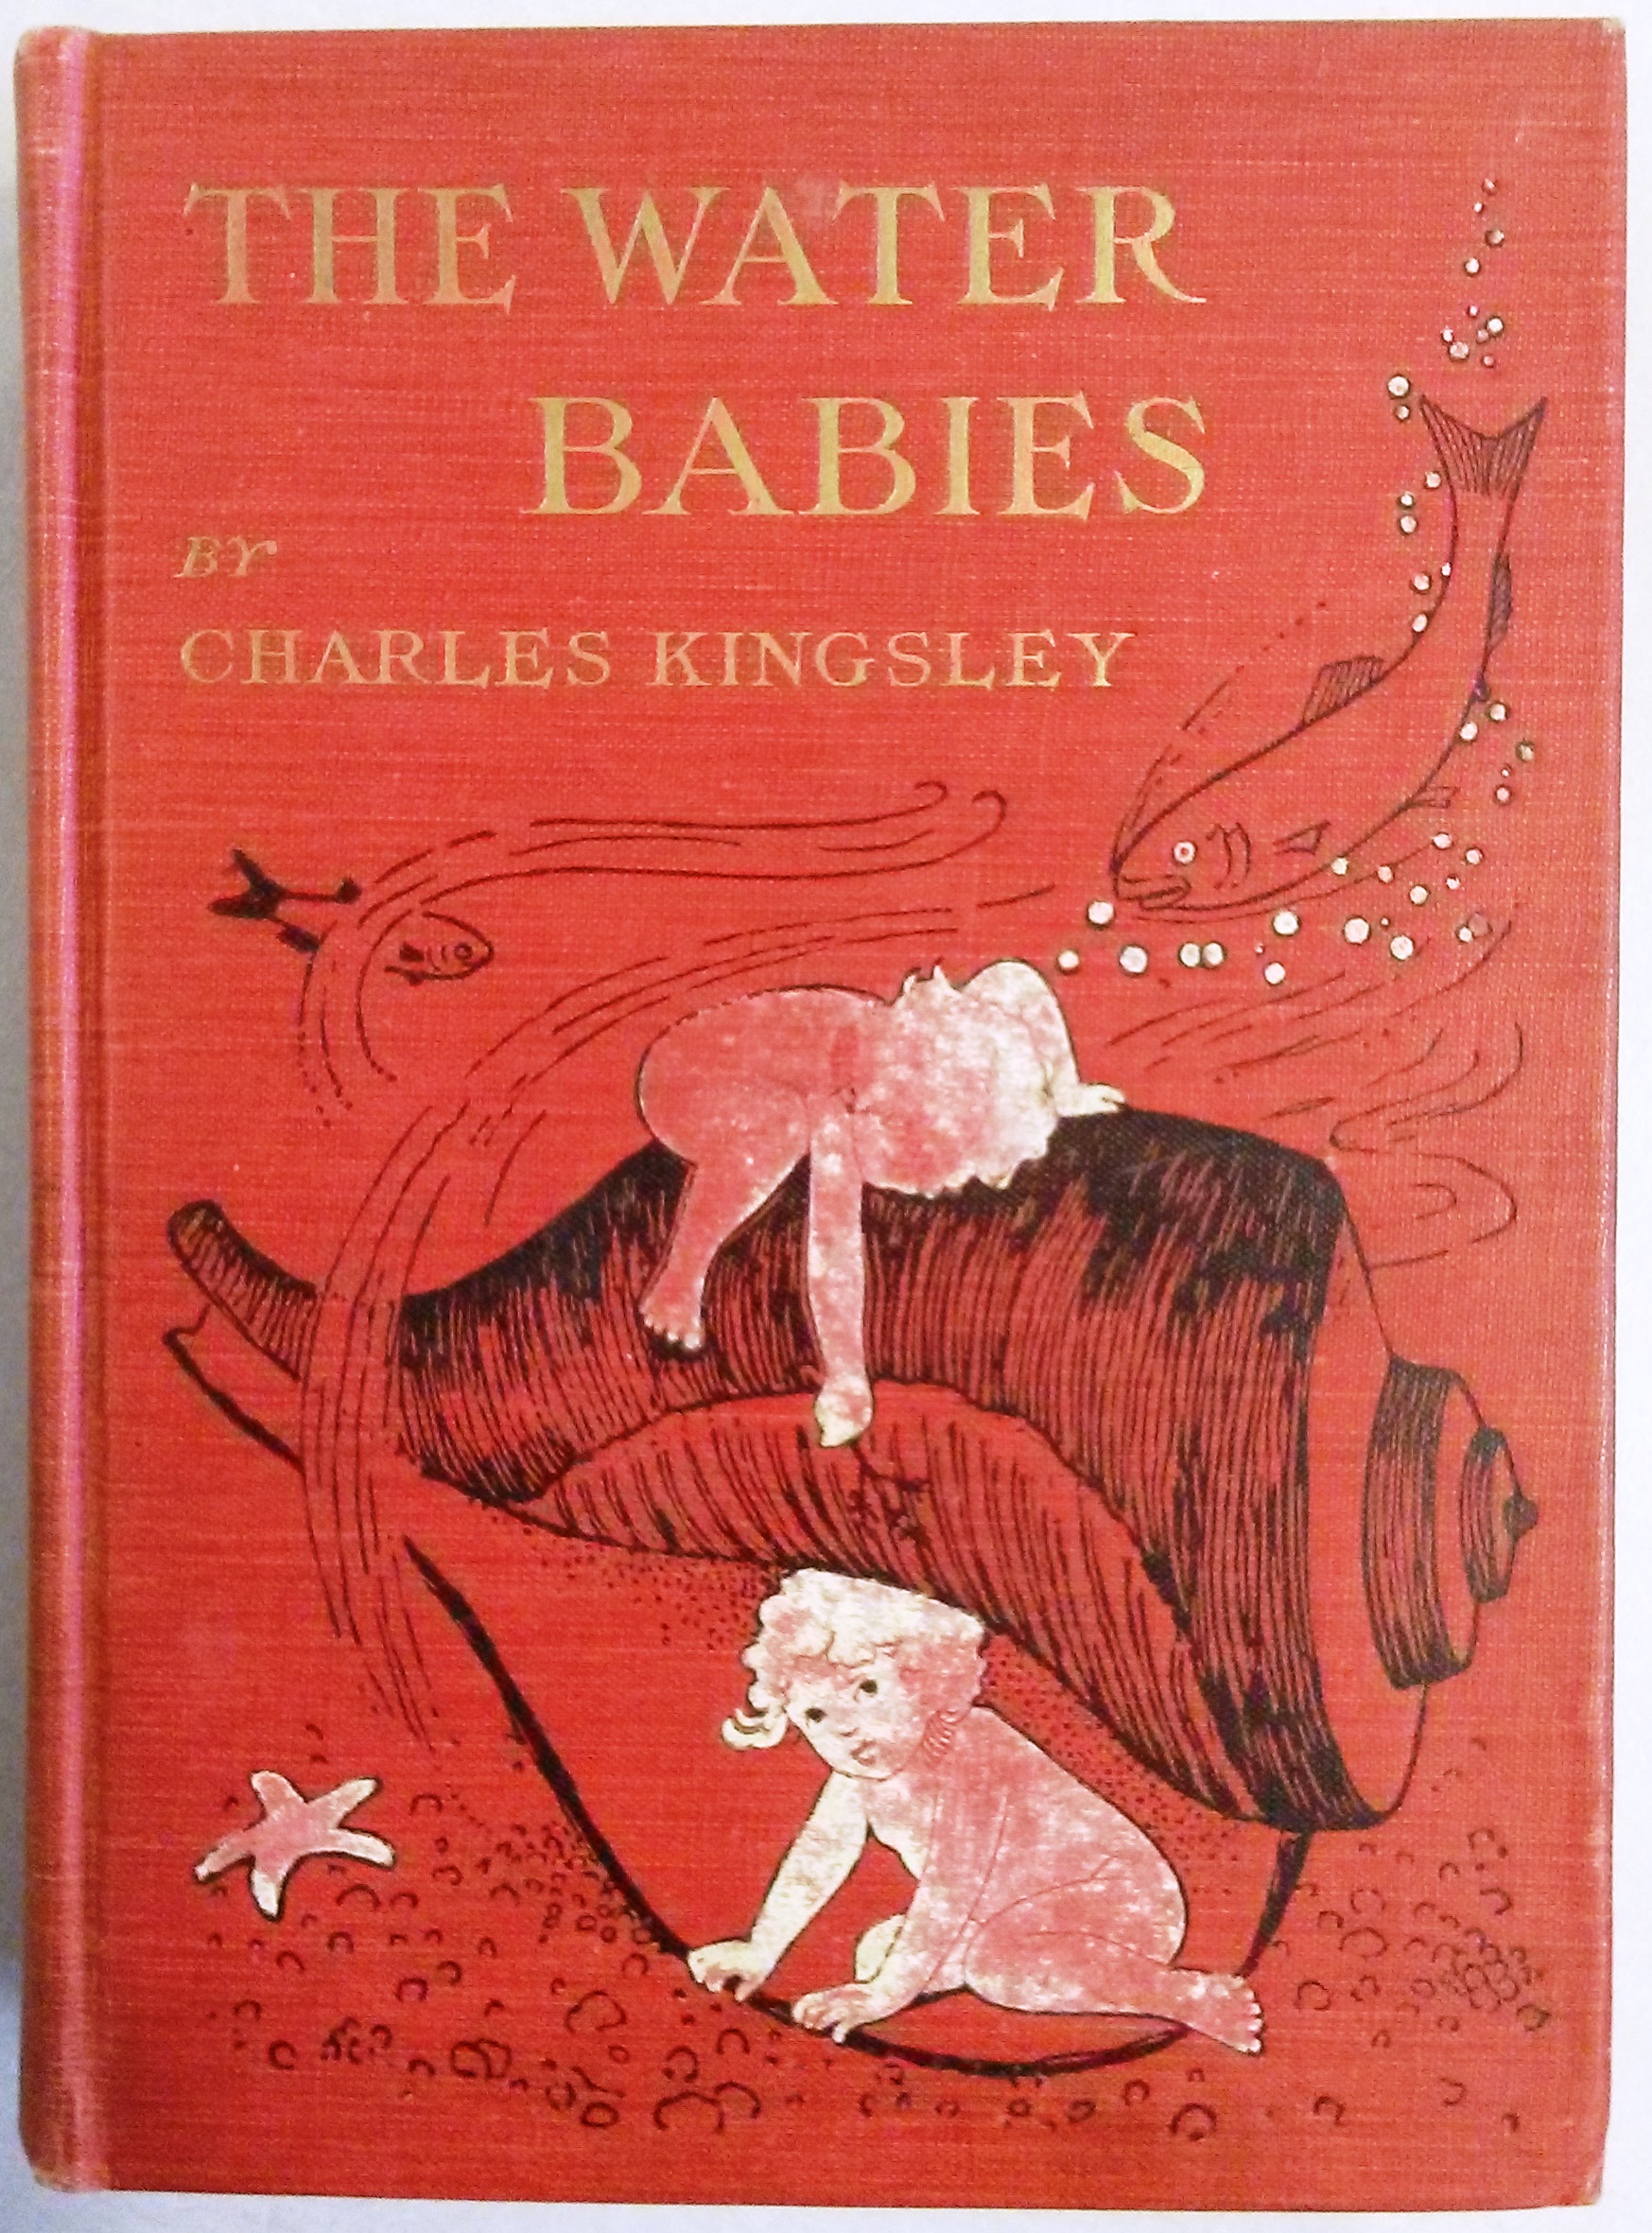 Cover image of two water babies and a seashell